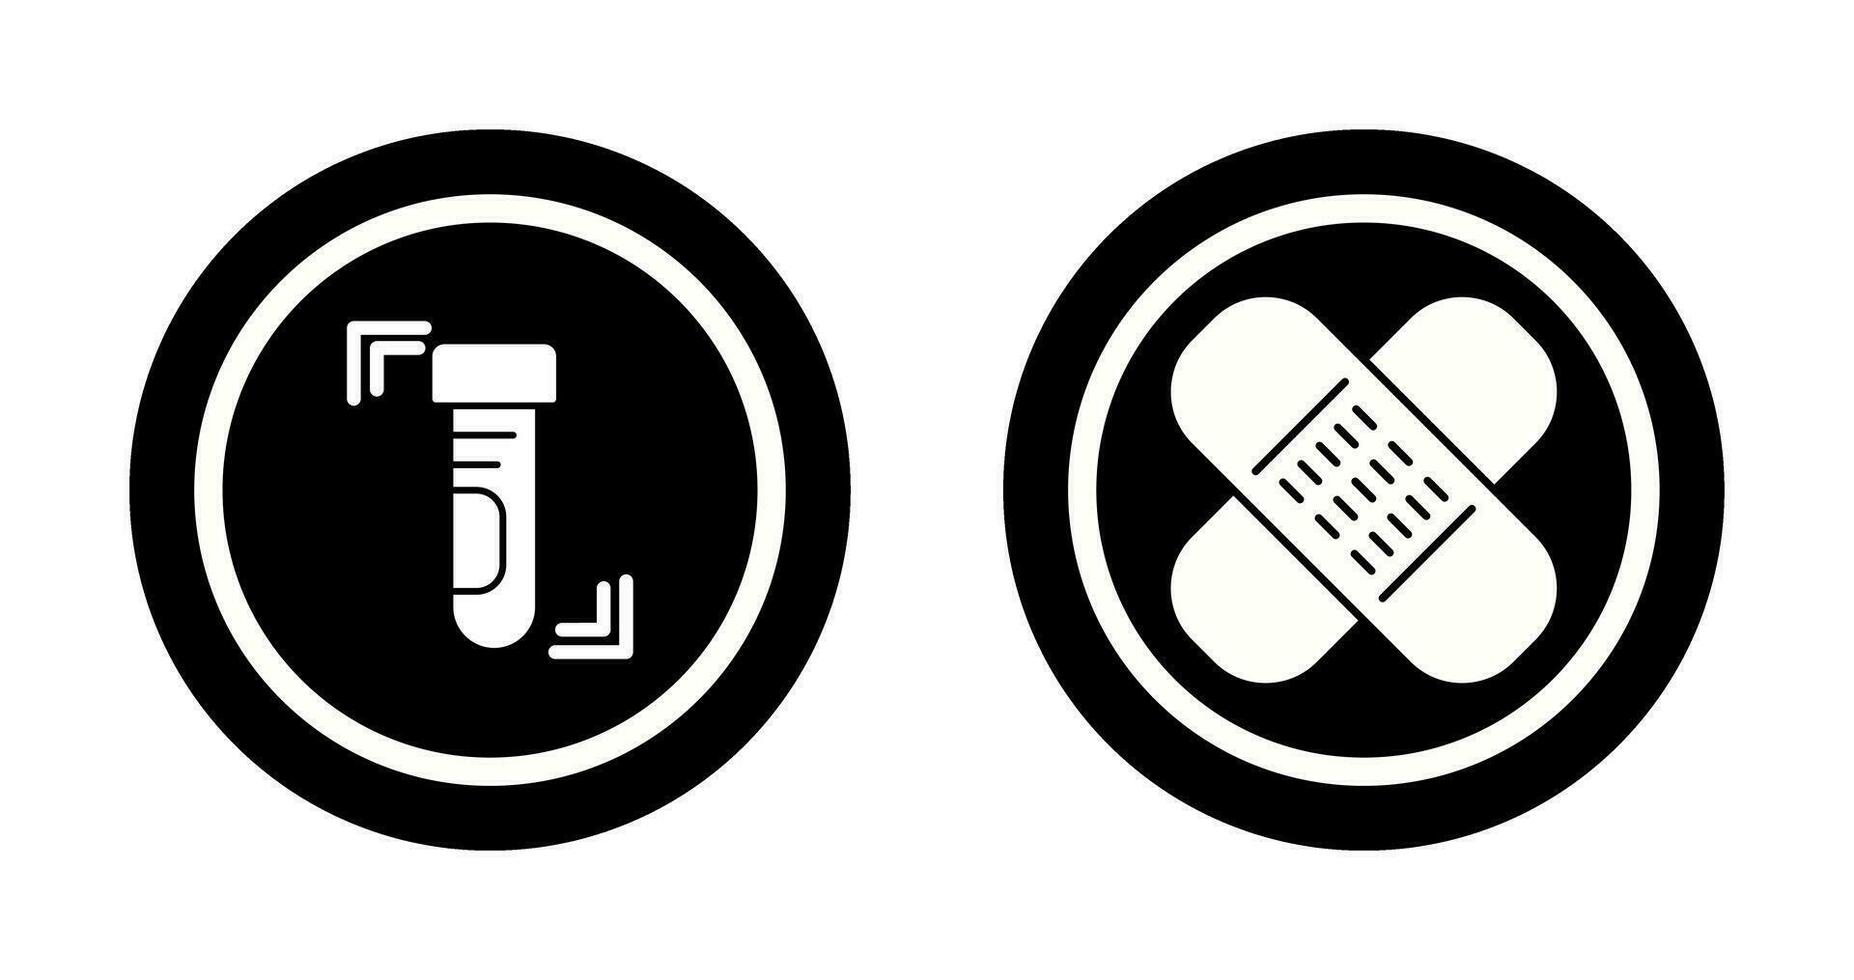 Test Tube and Wound Icon vector